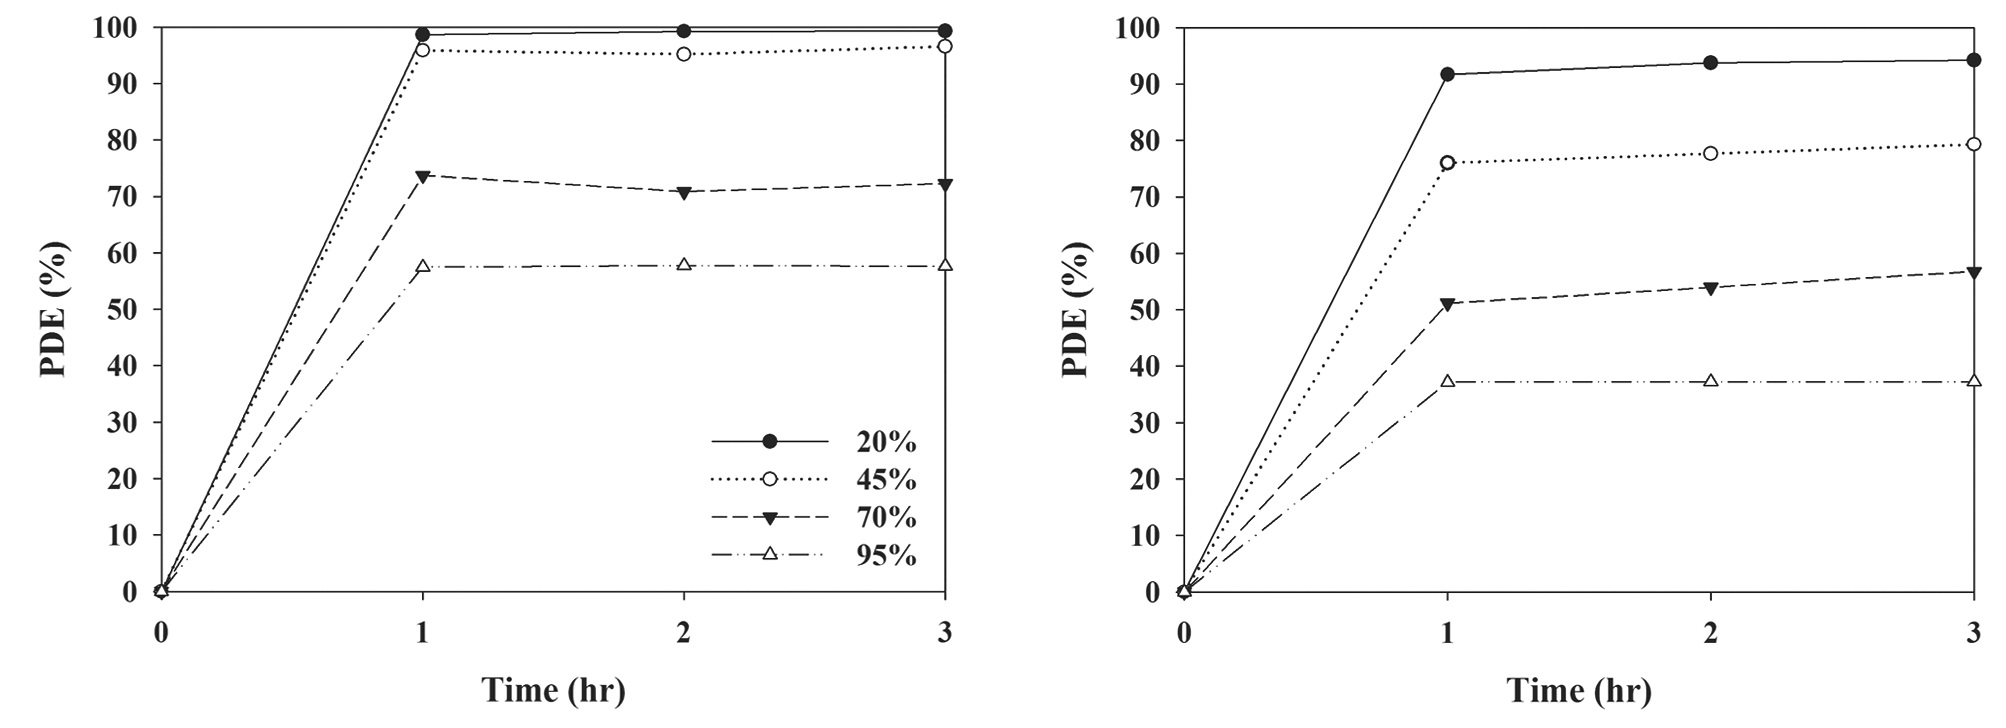 Photocatalytic degradation efficiencies for (a) trichloroethylene and (b) perchloroethylen as determined using a LED-activated N-TiO2 photocatalytic system according to relative humidity (20%, 45%, 70%, and 95%). LED: light-emitting diode, N-TiO2: N-doped titanium dioxide, PDE: photocatalytic degradation efficiency.